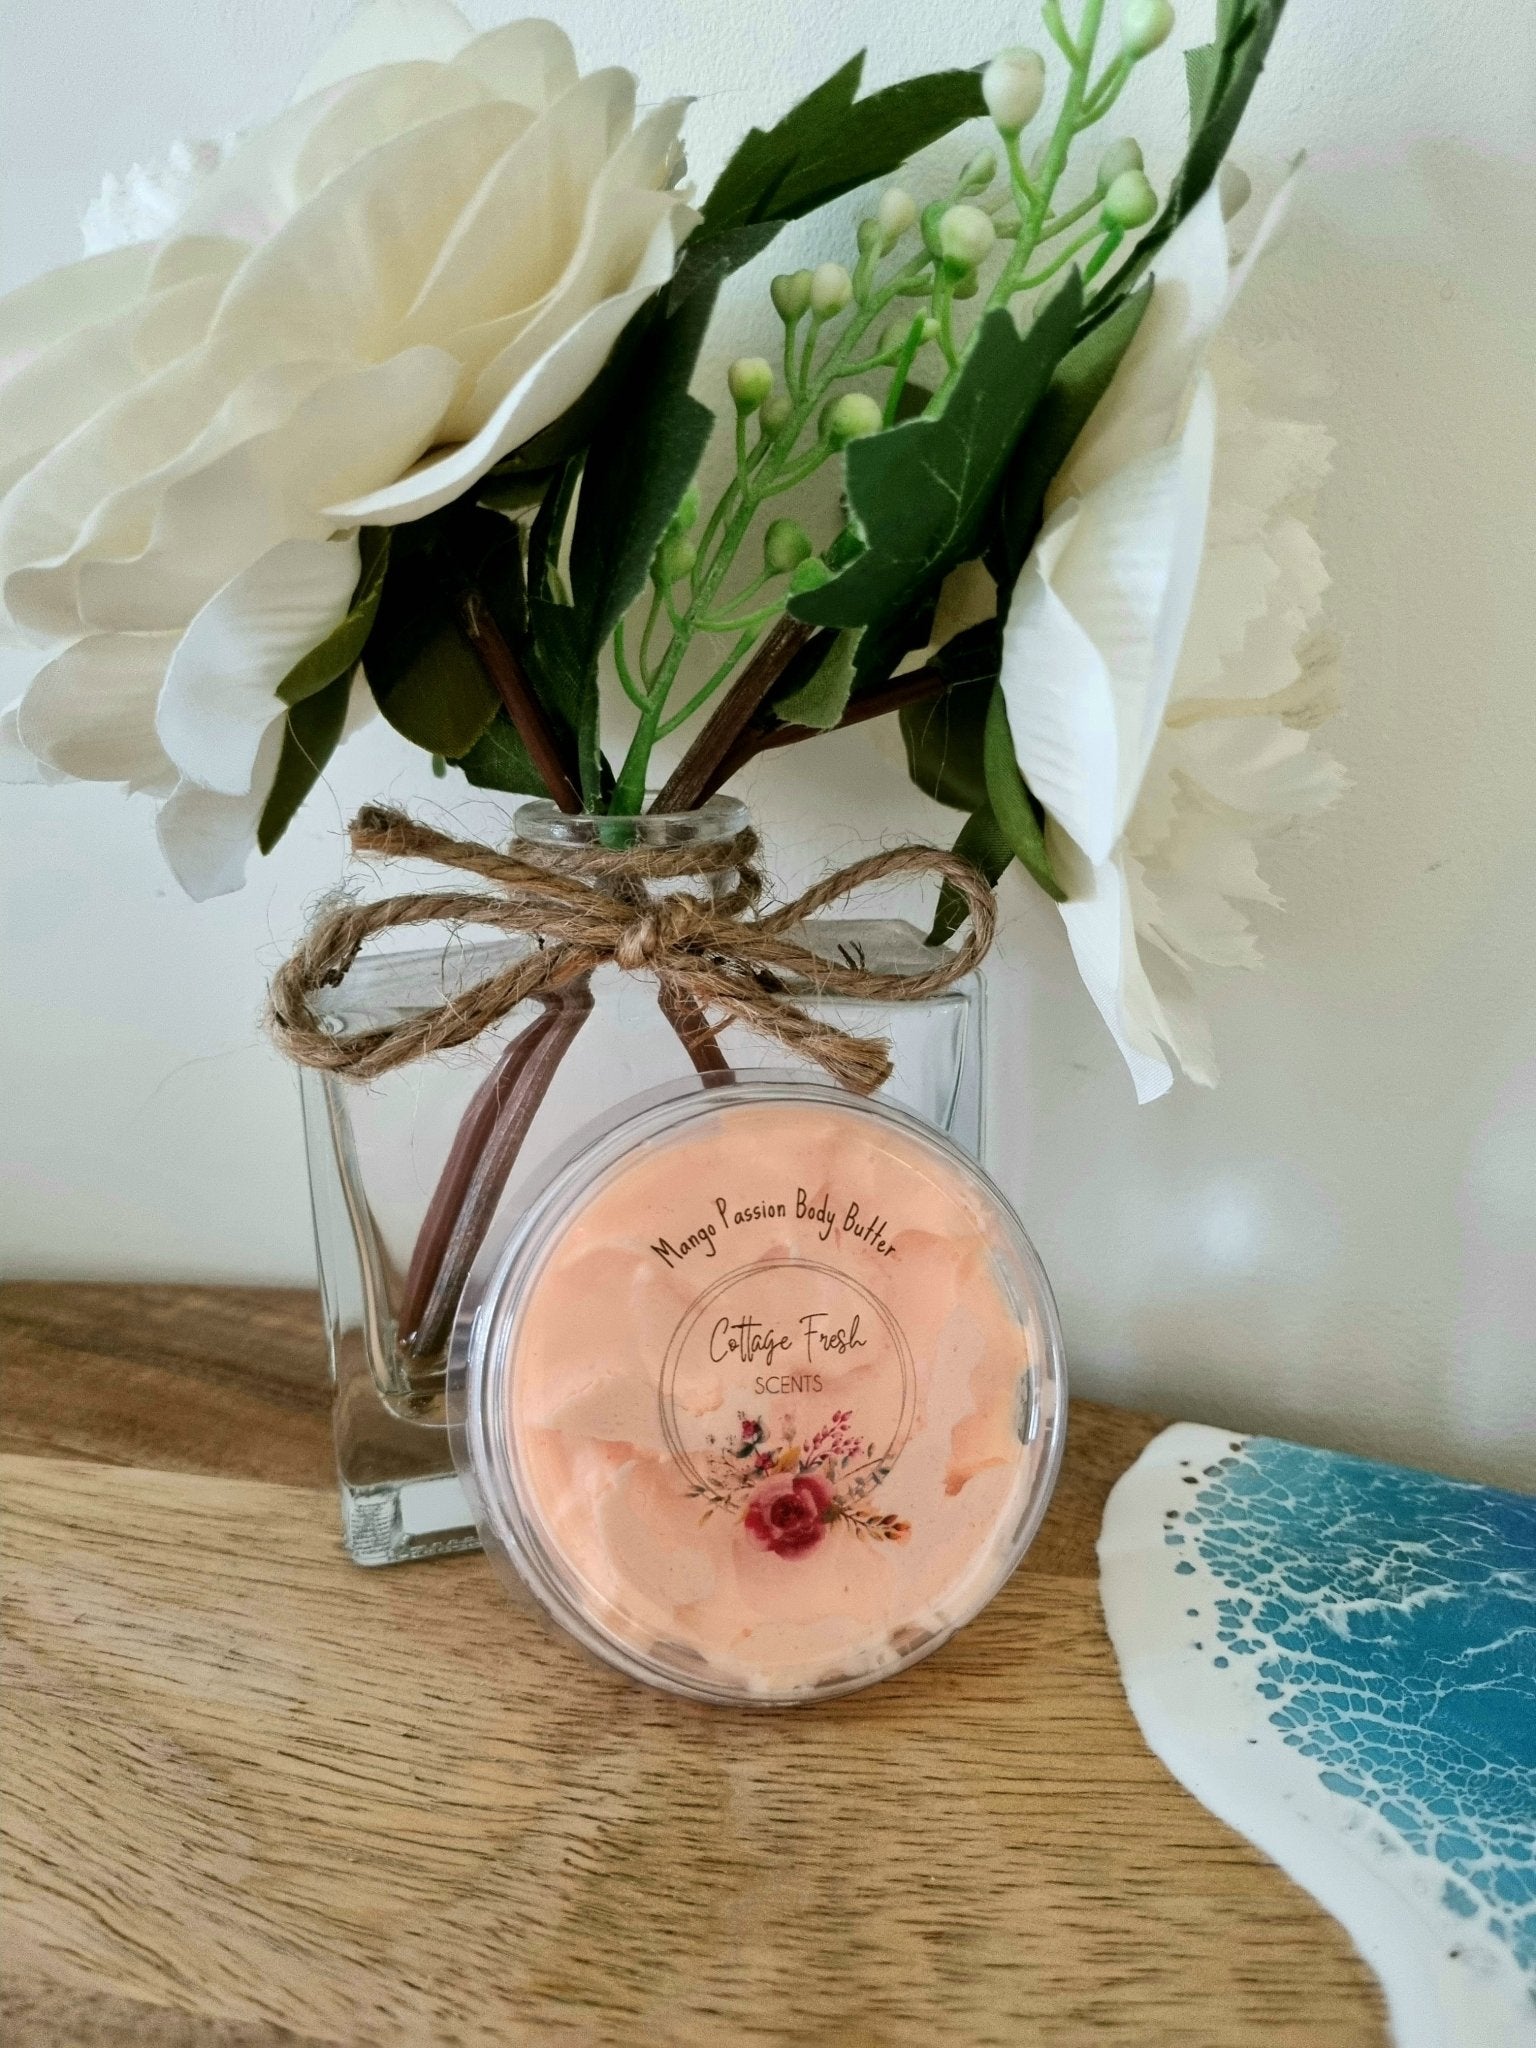 Mango Passion Luxury Whipped Body Butter - Body Butter - Cottage Fresh Scents